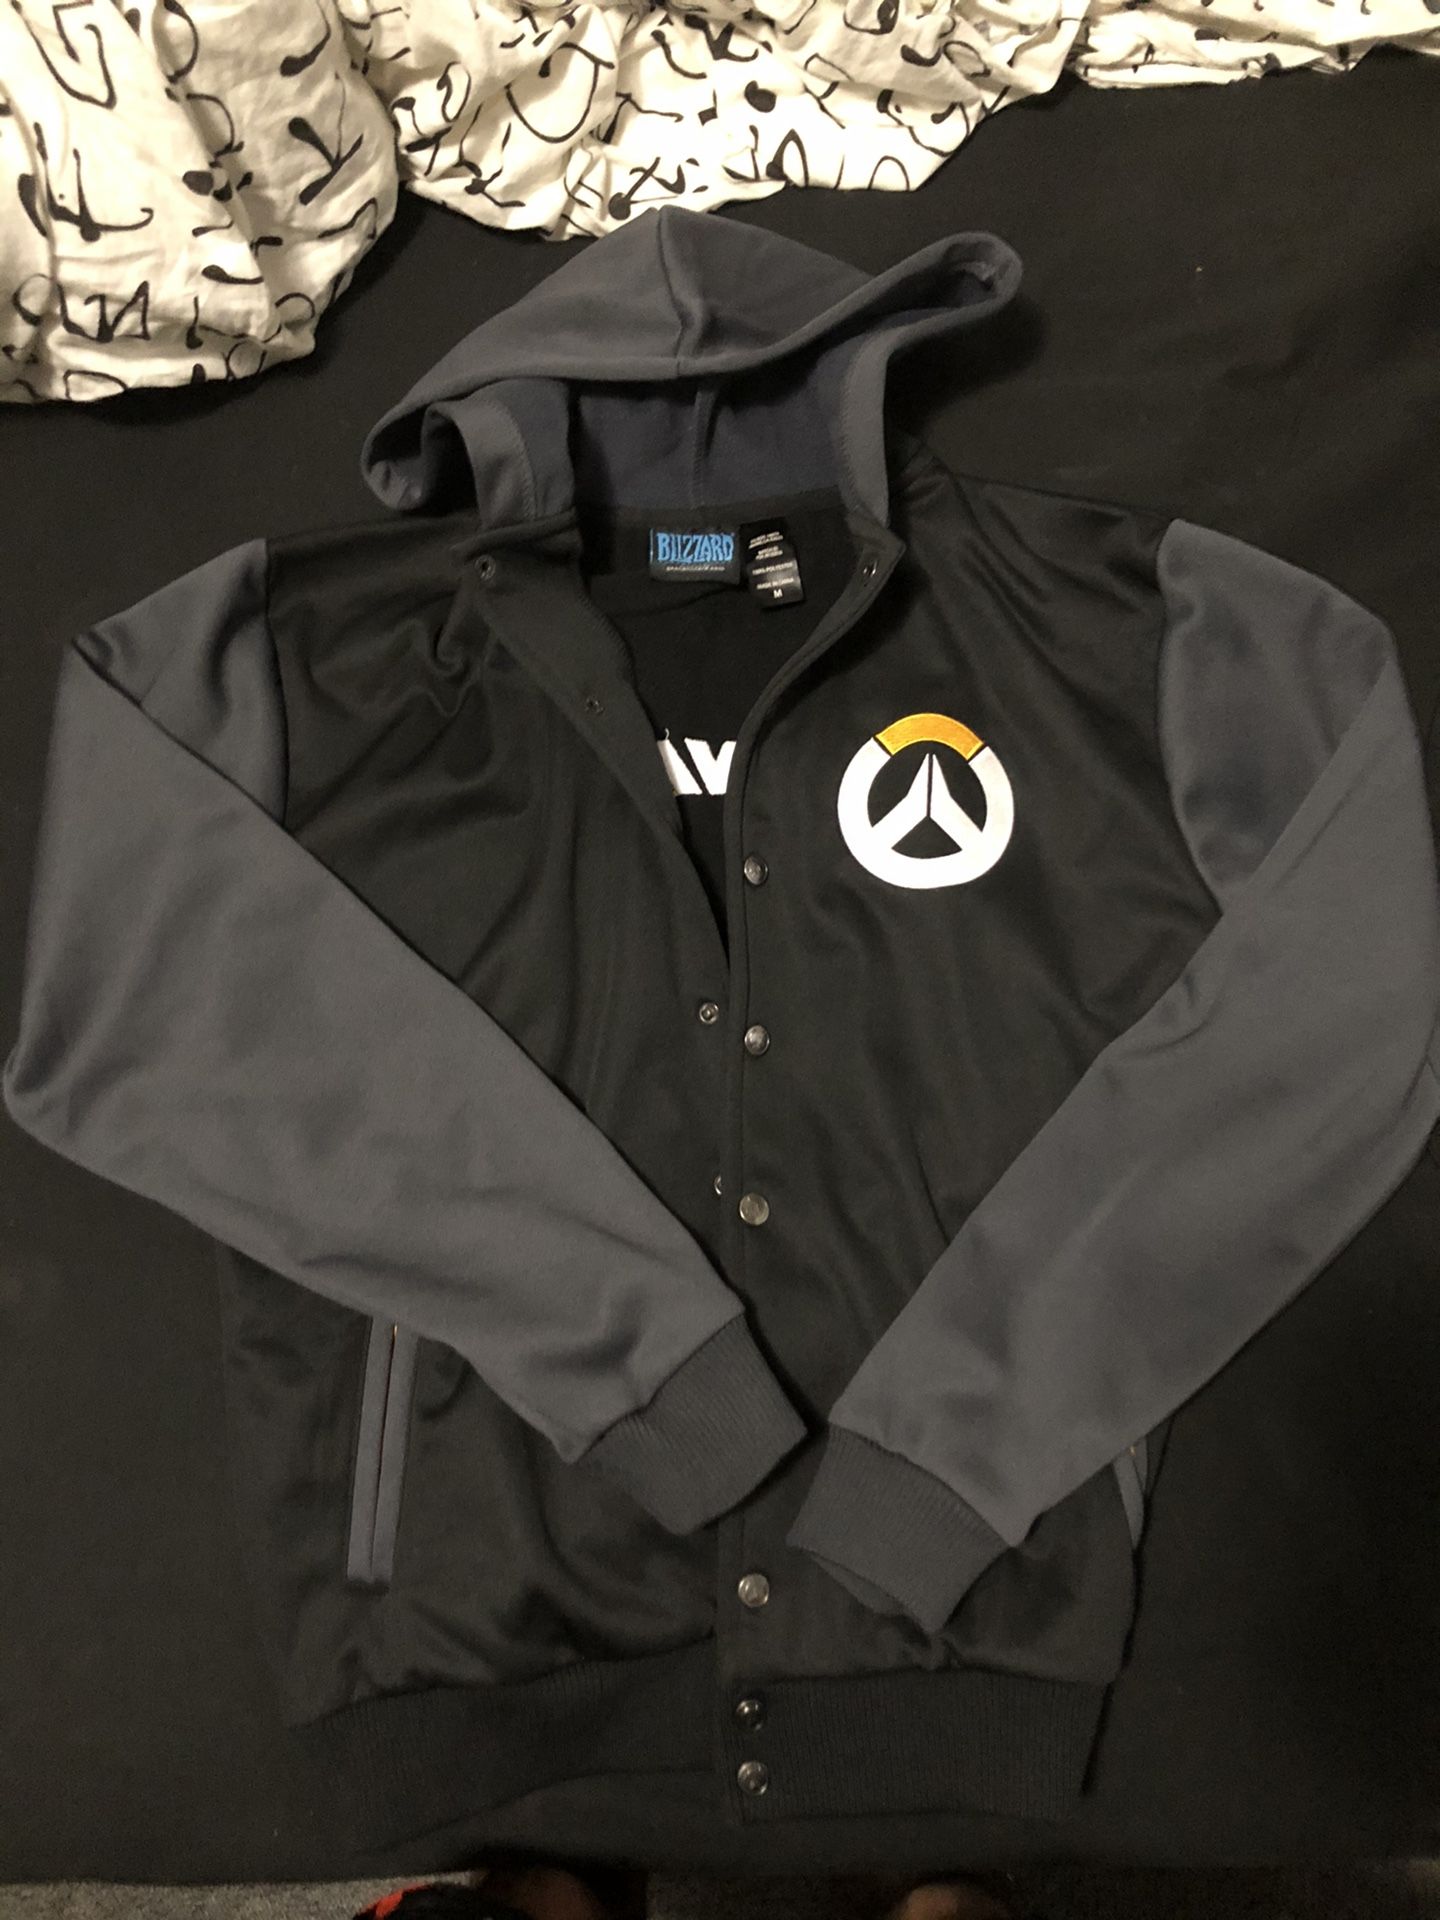 Official Blizzard Overwatch jacket